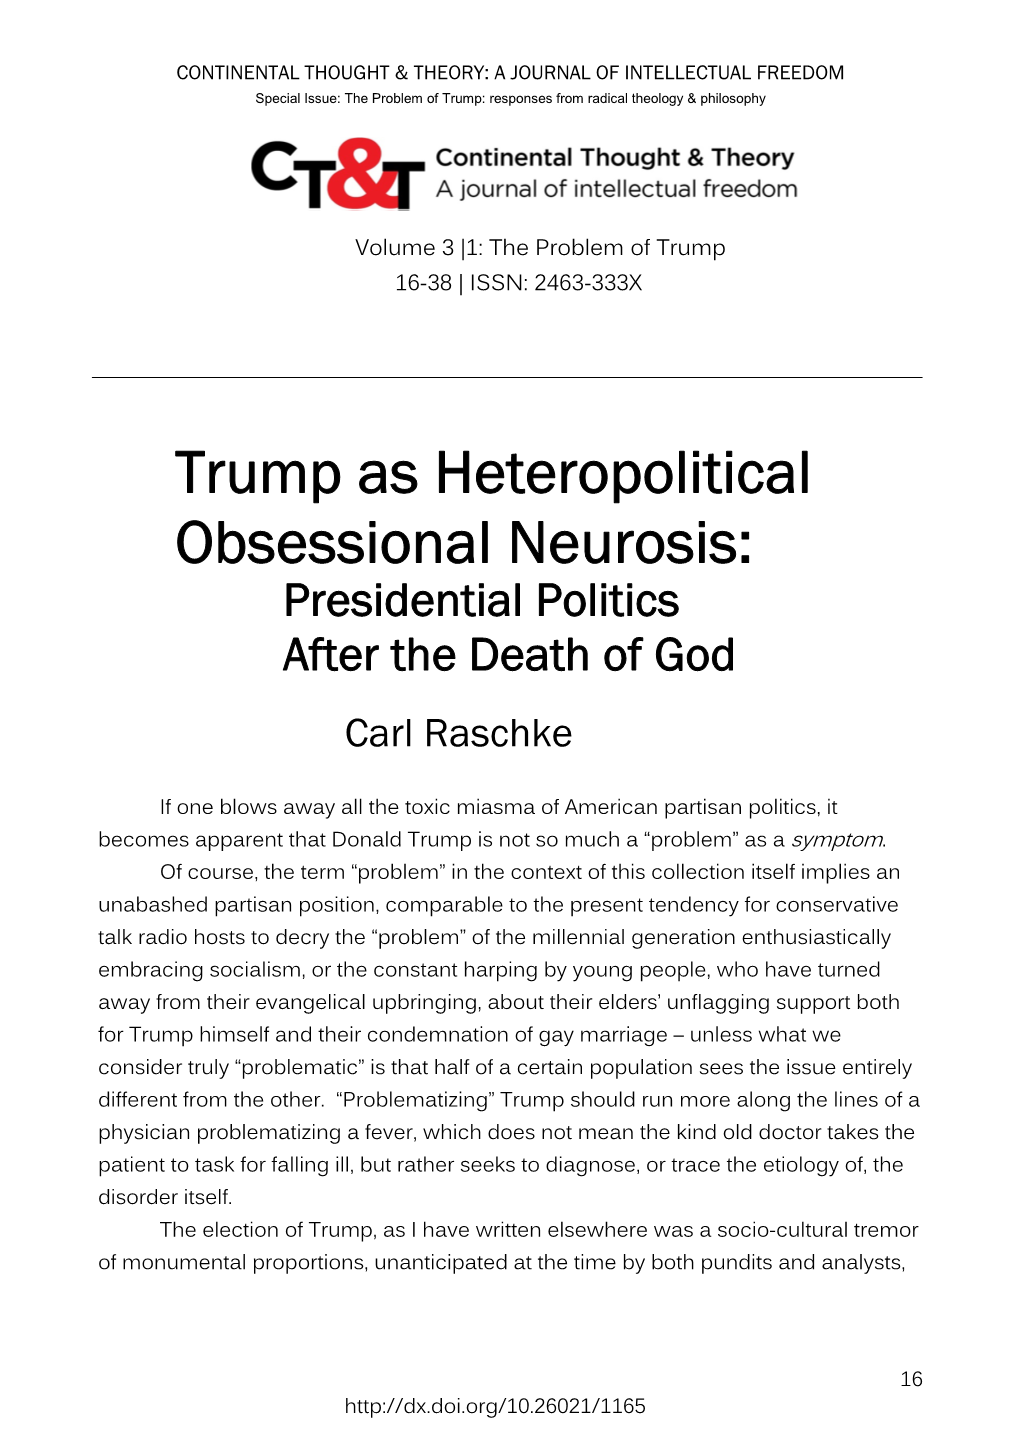 Trump As Heteropolitical Obsessional Neurosis: Presidential Politics After the Death of God